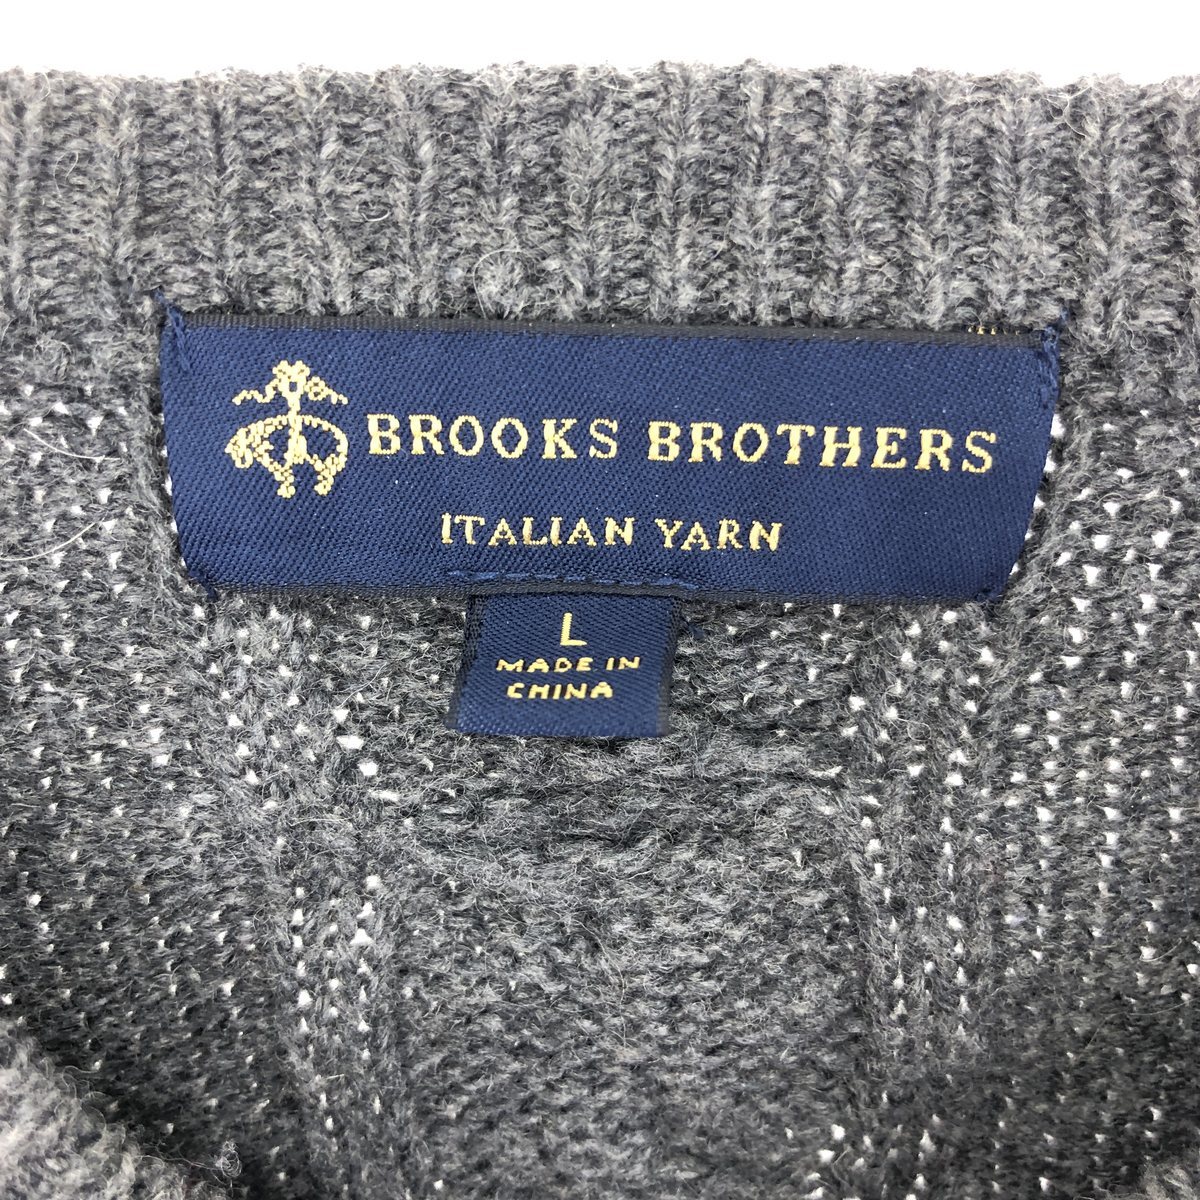  old clothes Brooks Brothers Brooks Brothers V neck melino wool knitted sweater men's L /eaa398645